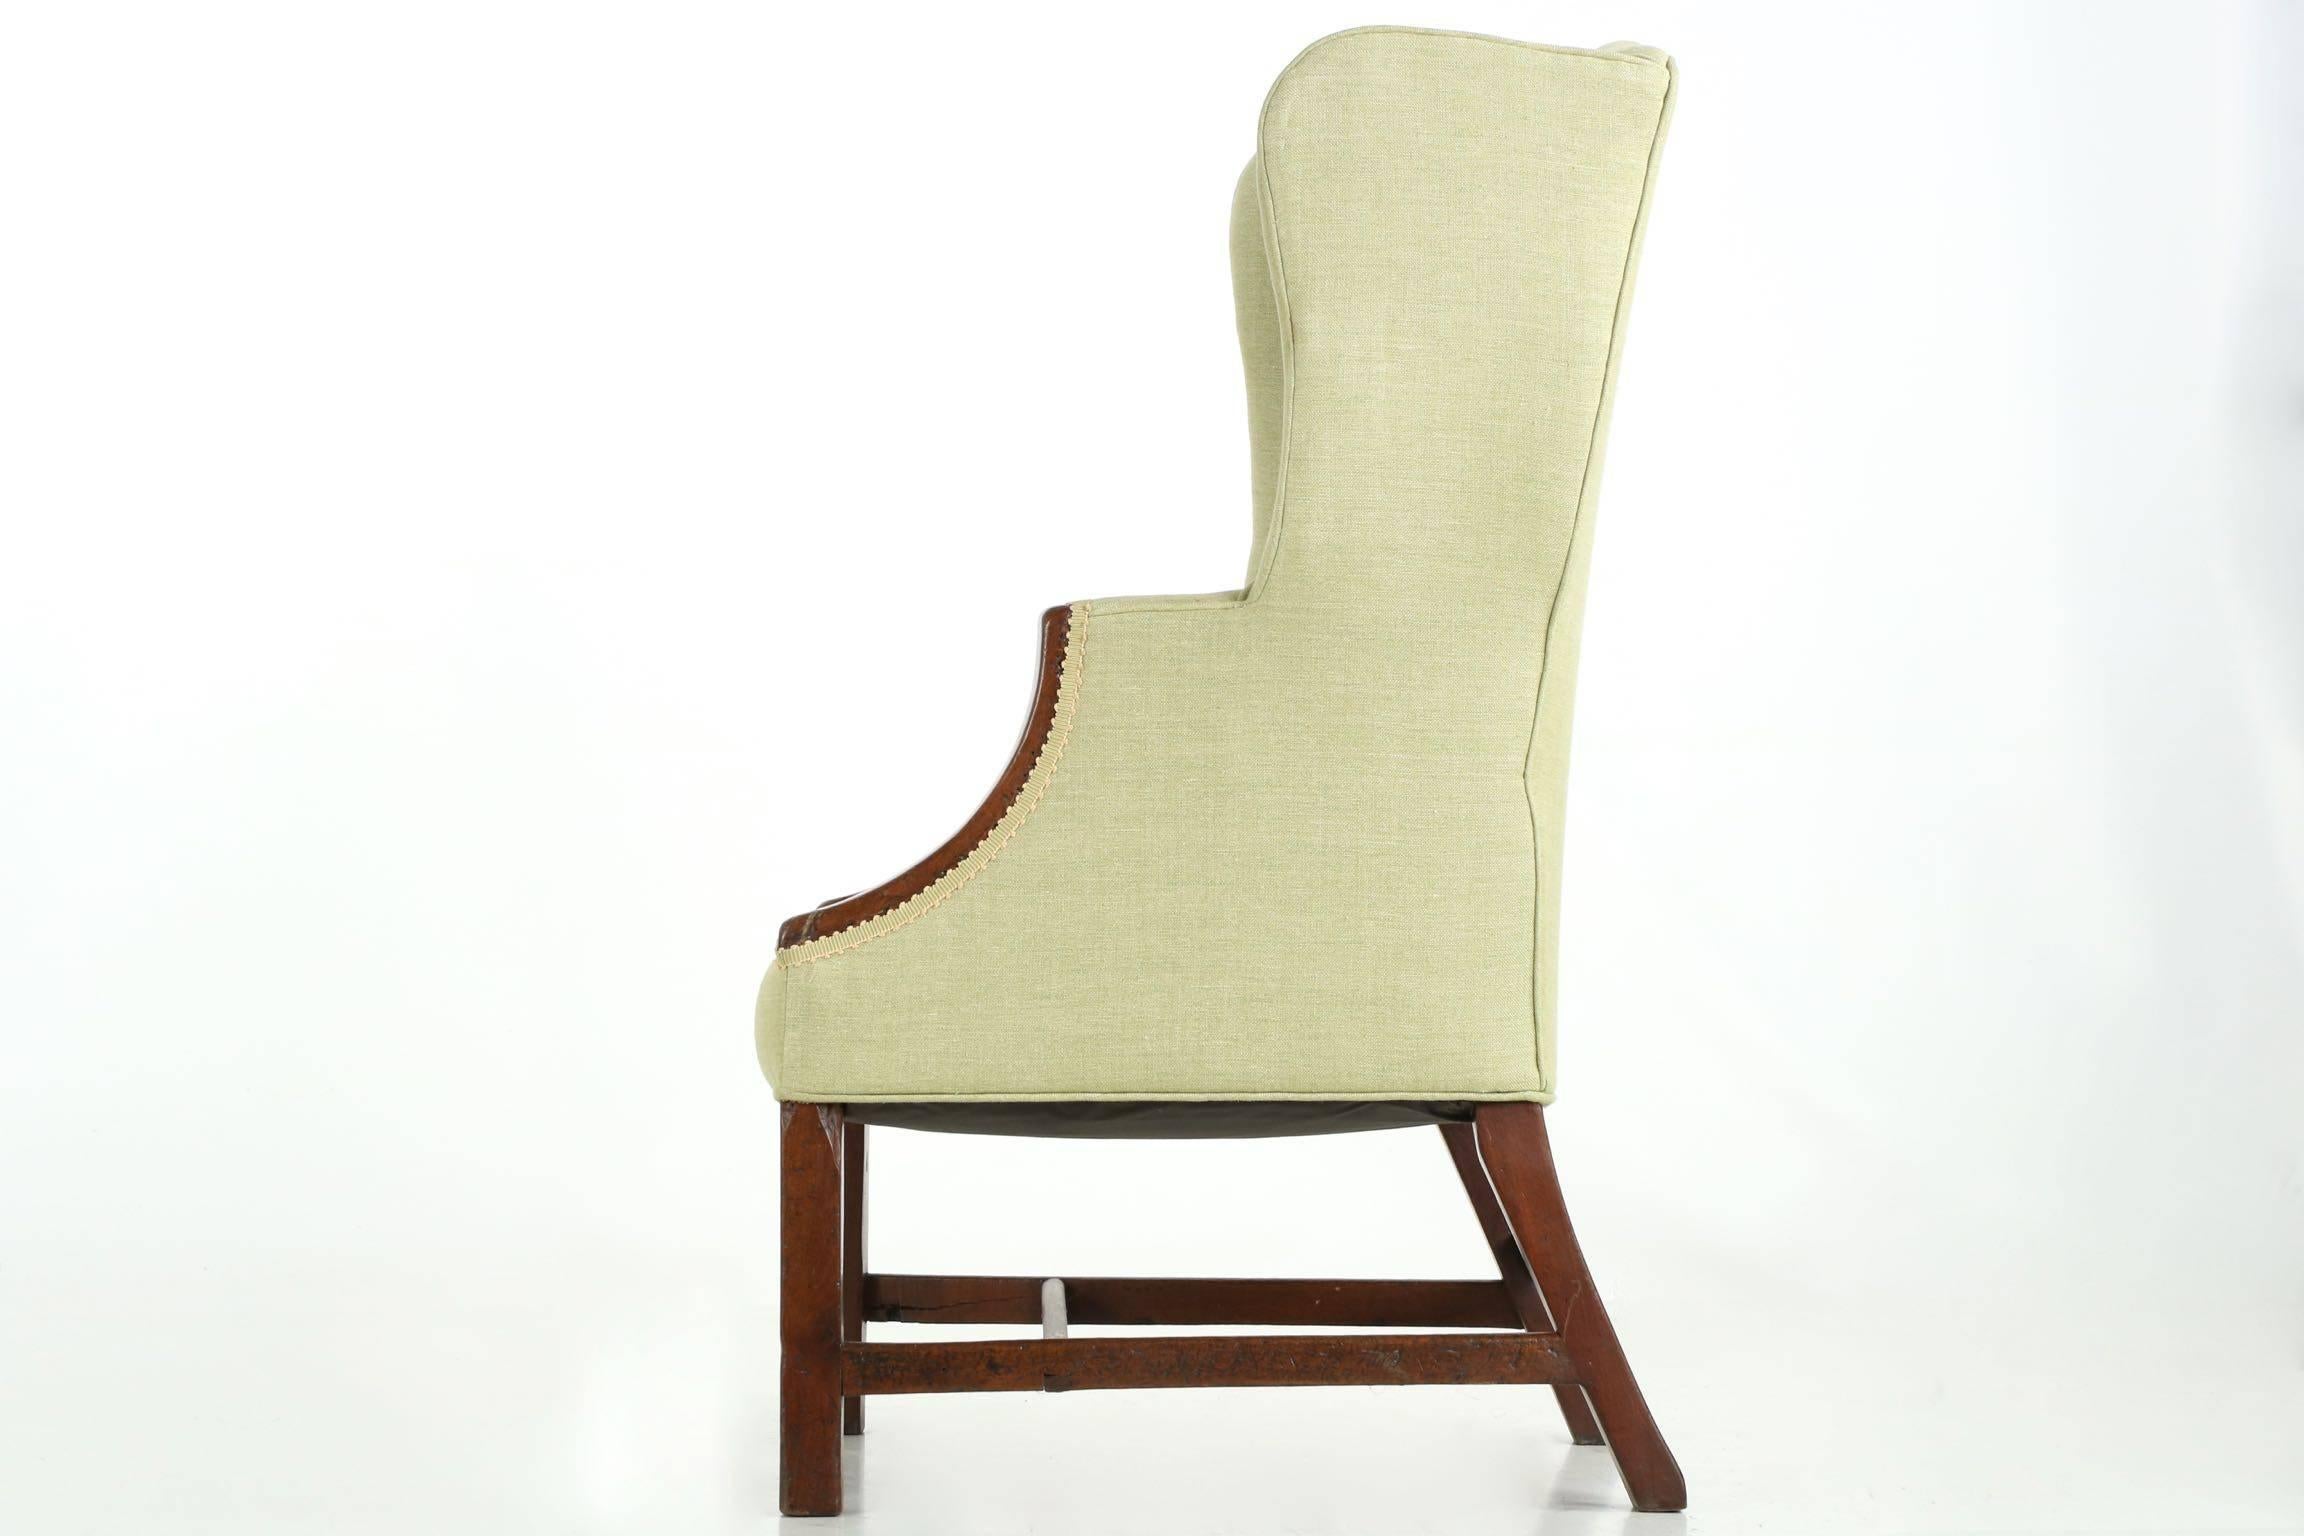 This unusual and most attractive diminutive wingback armchairs crafted with an unrelenting curvature in the wings and crest, these undulating in all three dimensions to hug the sitter most effectively. Designed for a very petite sitter or possibly